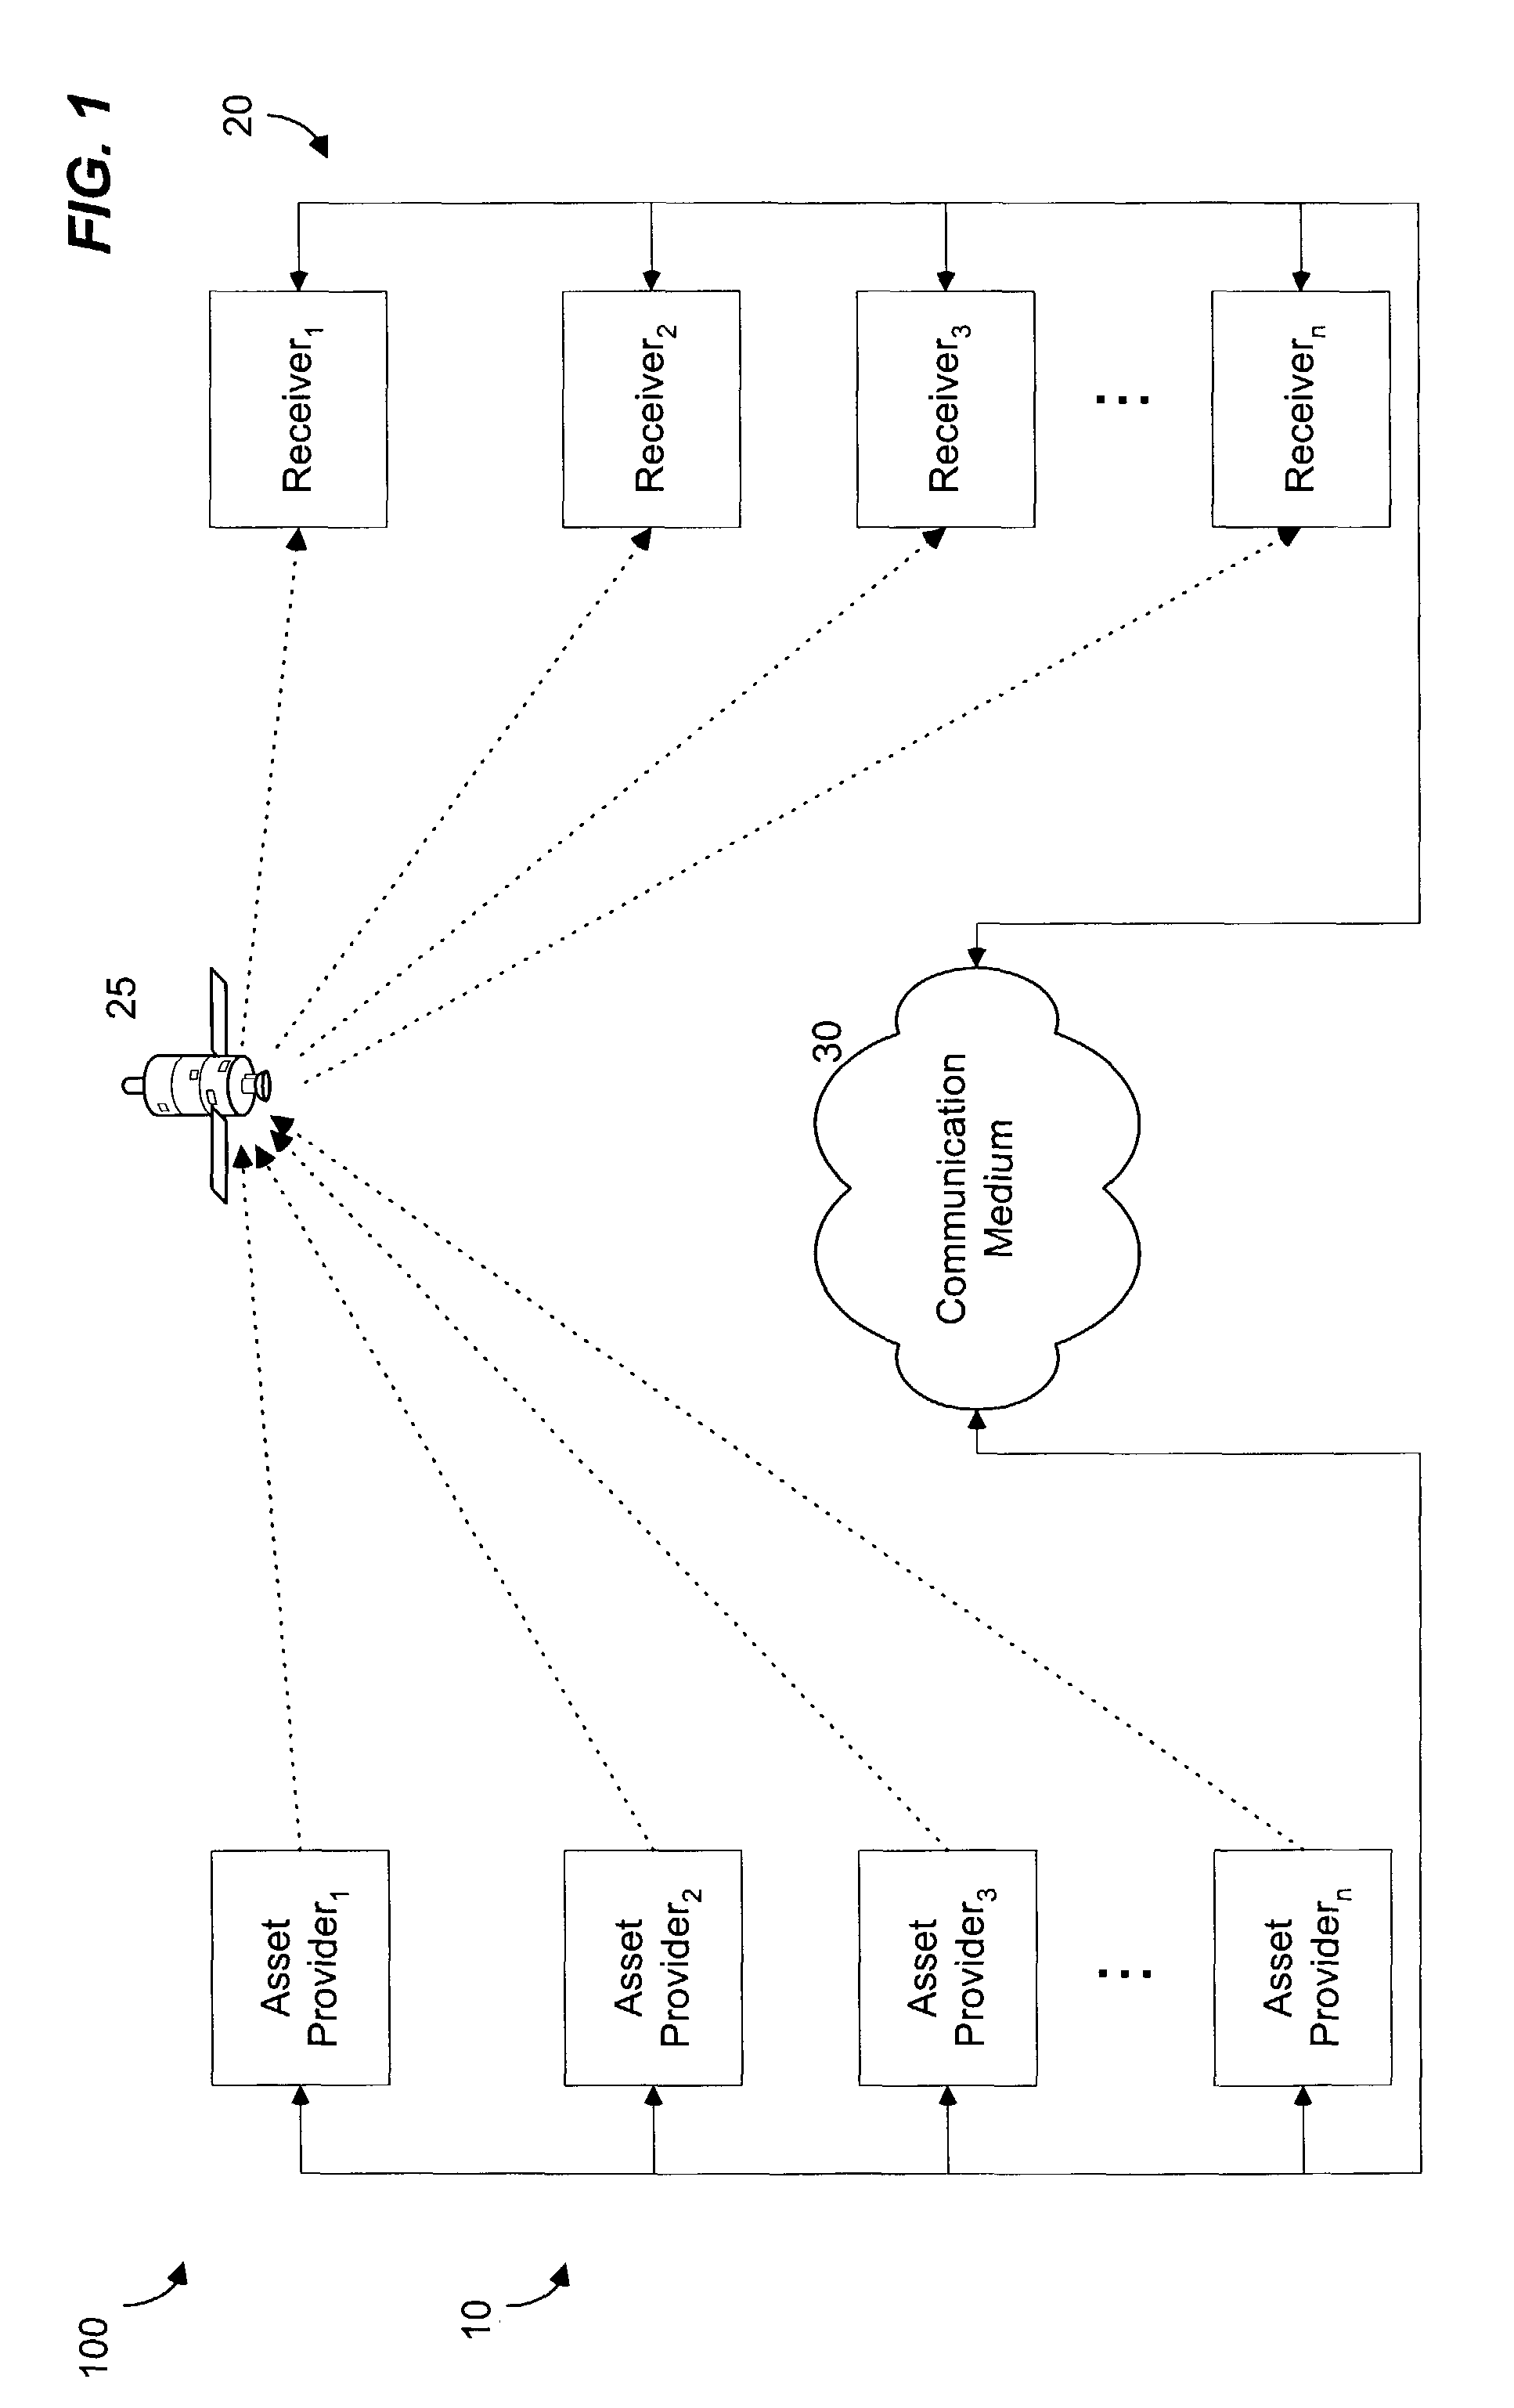 System and method for distributing network-based personal video